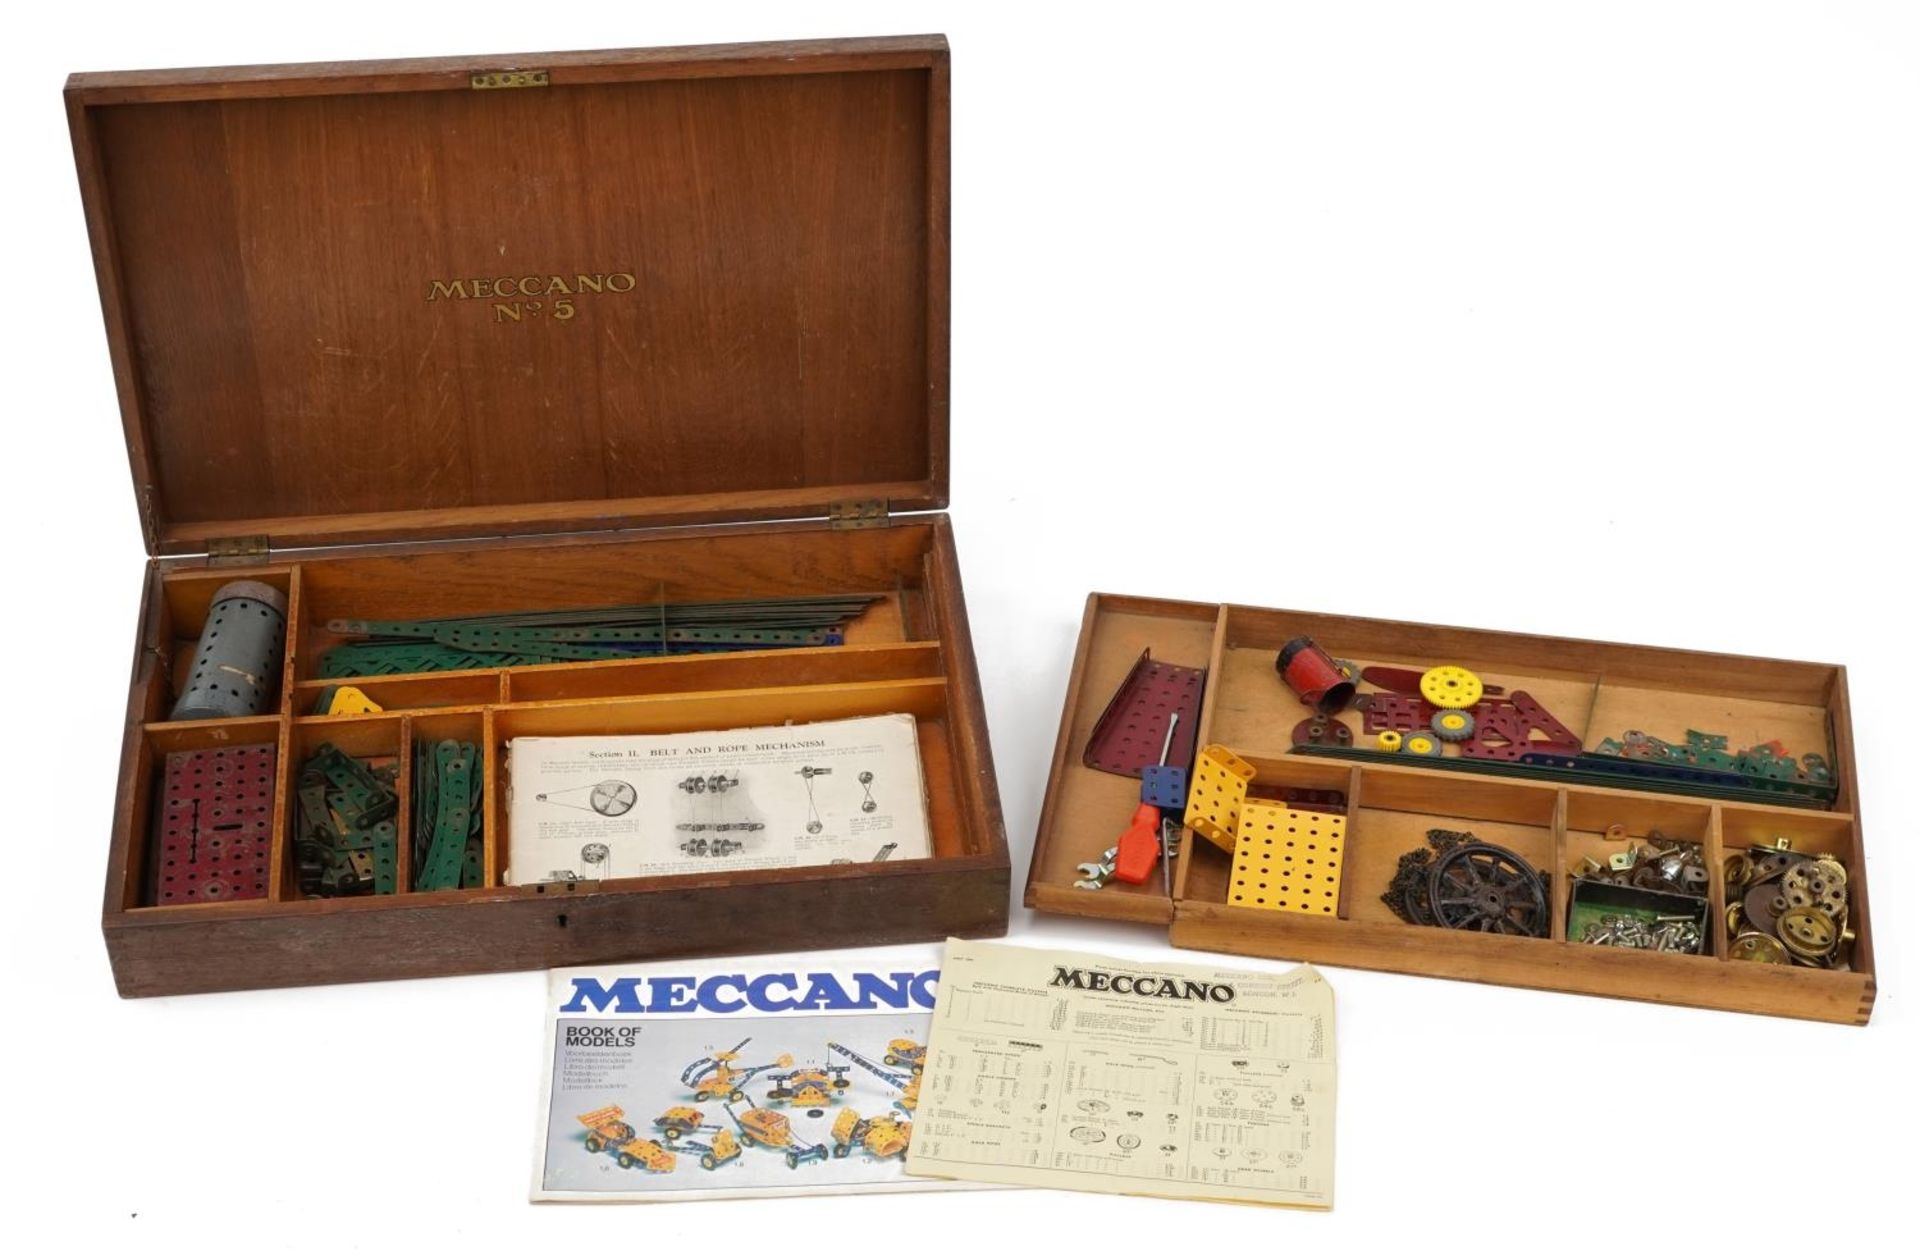 Meccano no 5 construction set with box, 51cm wide : For further information on this lot please